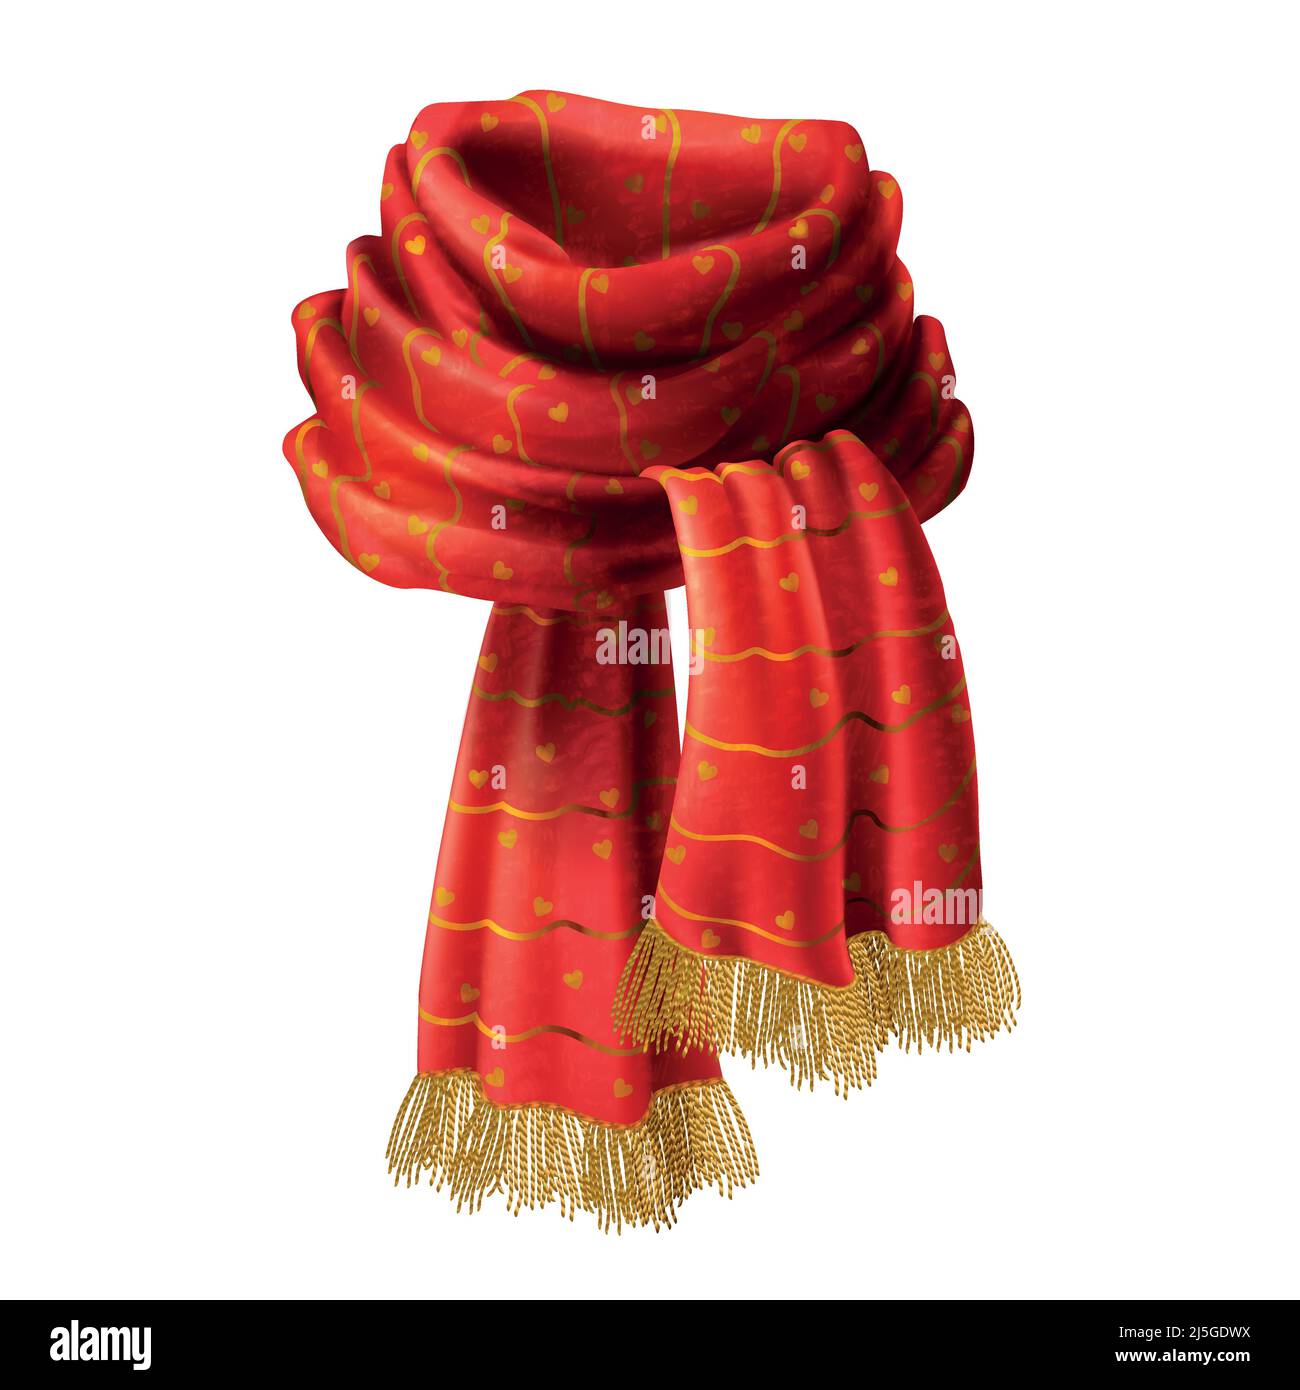 Vector 3d realistic illustration of red knitted scarf with decorative pattern and gold fringe, isolated on background. Warm woolen knitwear for cold w Stock Vector